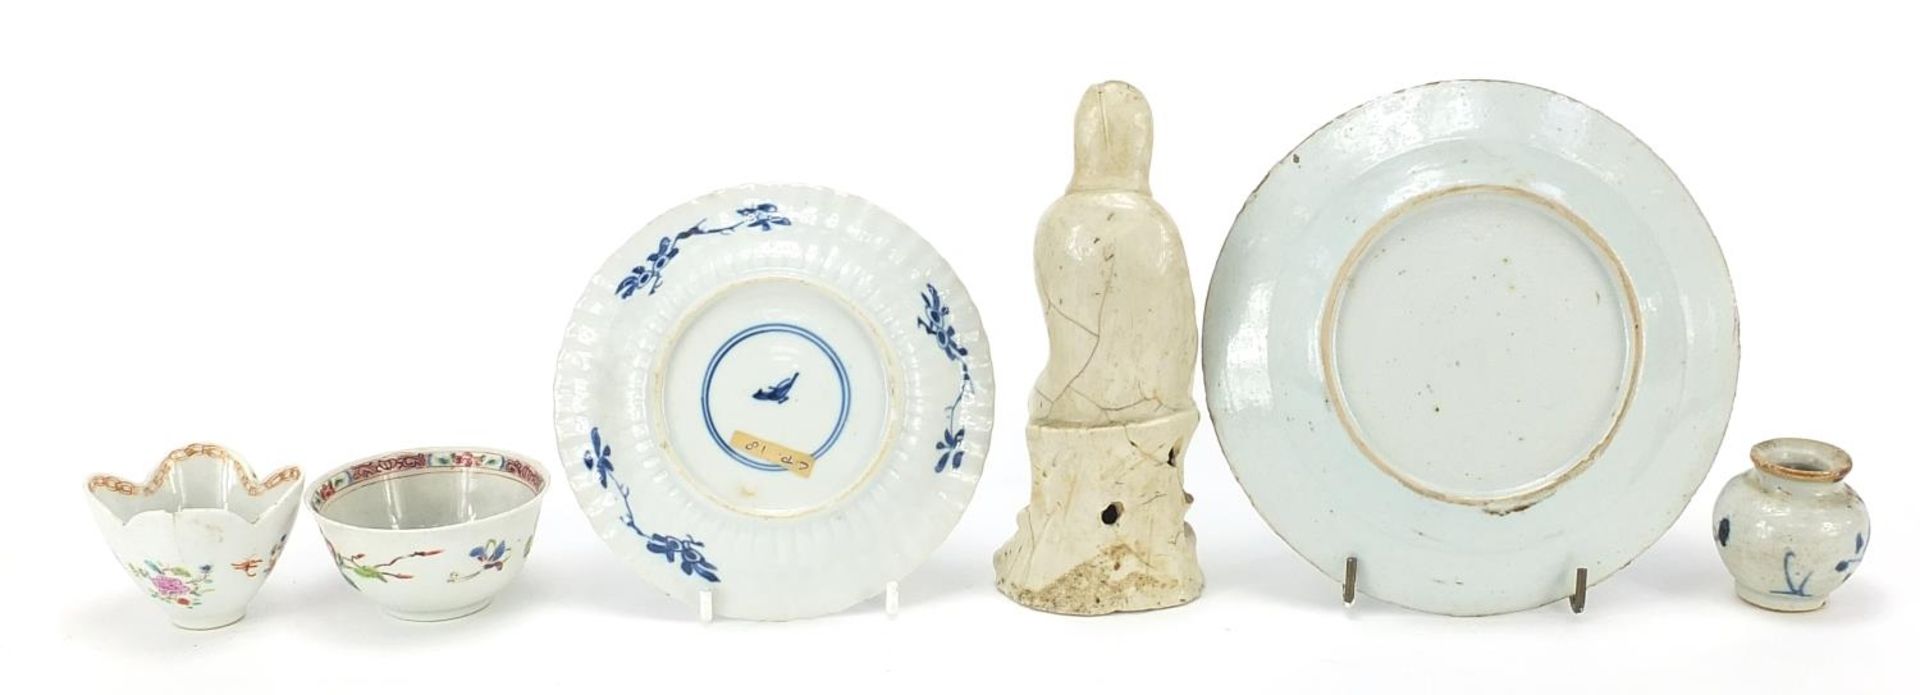 Chinese porcelain including blanc de chine figurine of Guanyin, blue and white plates and tea - Image 4 of 6